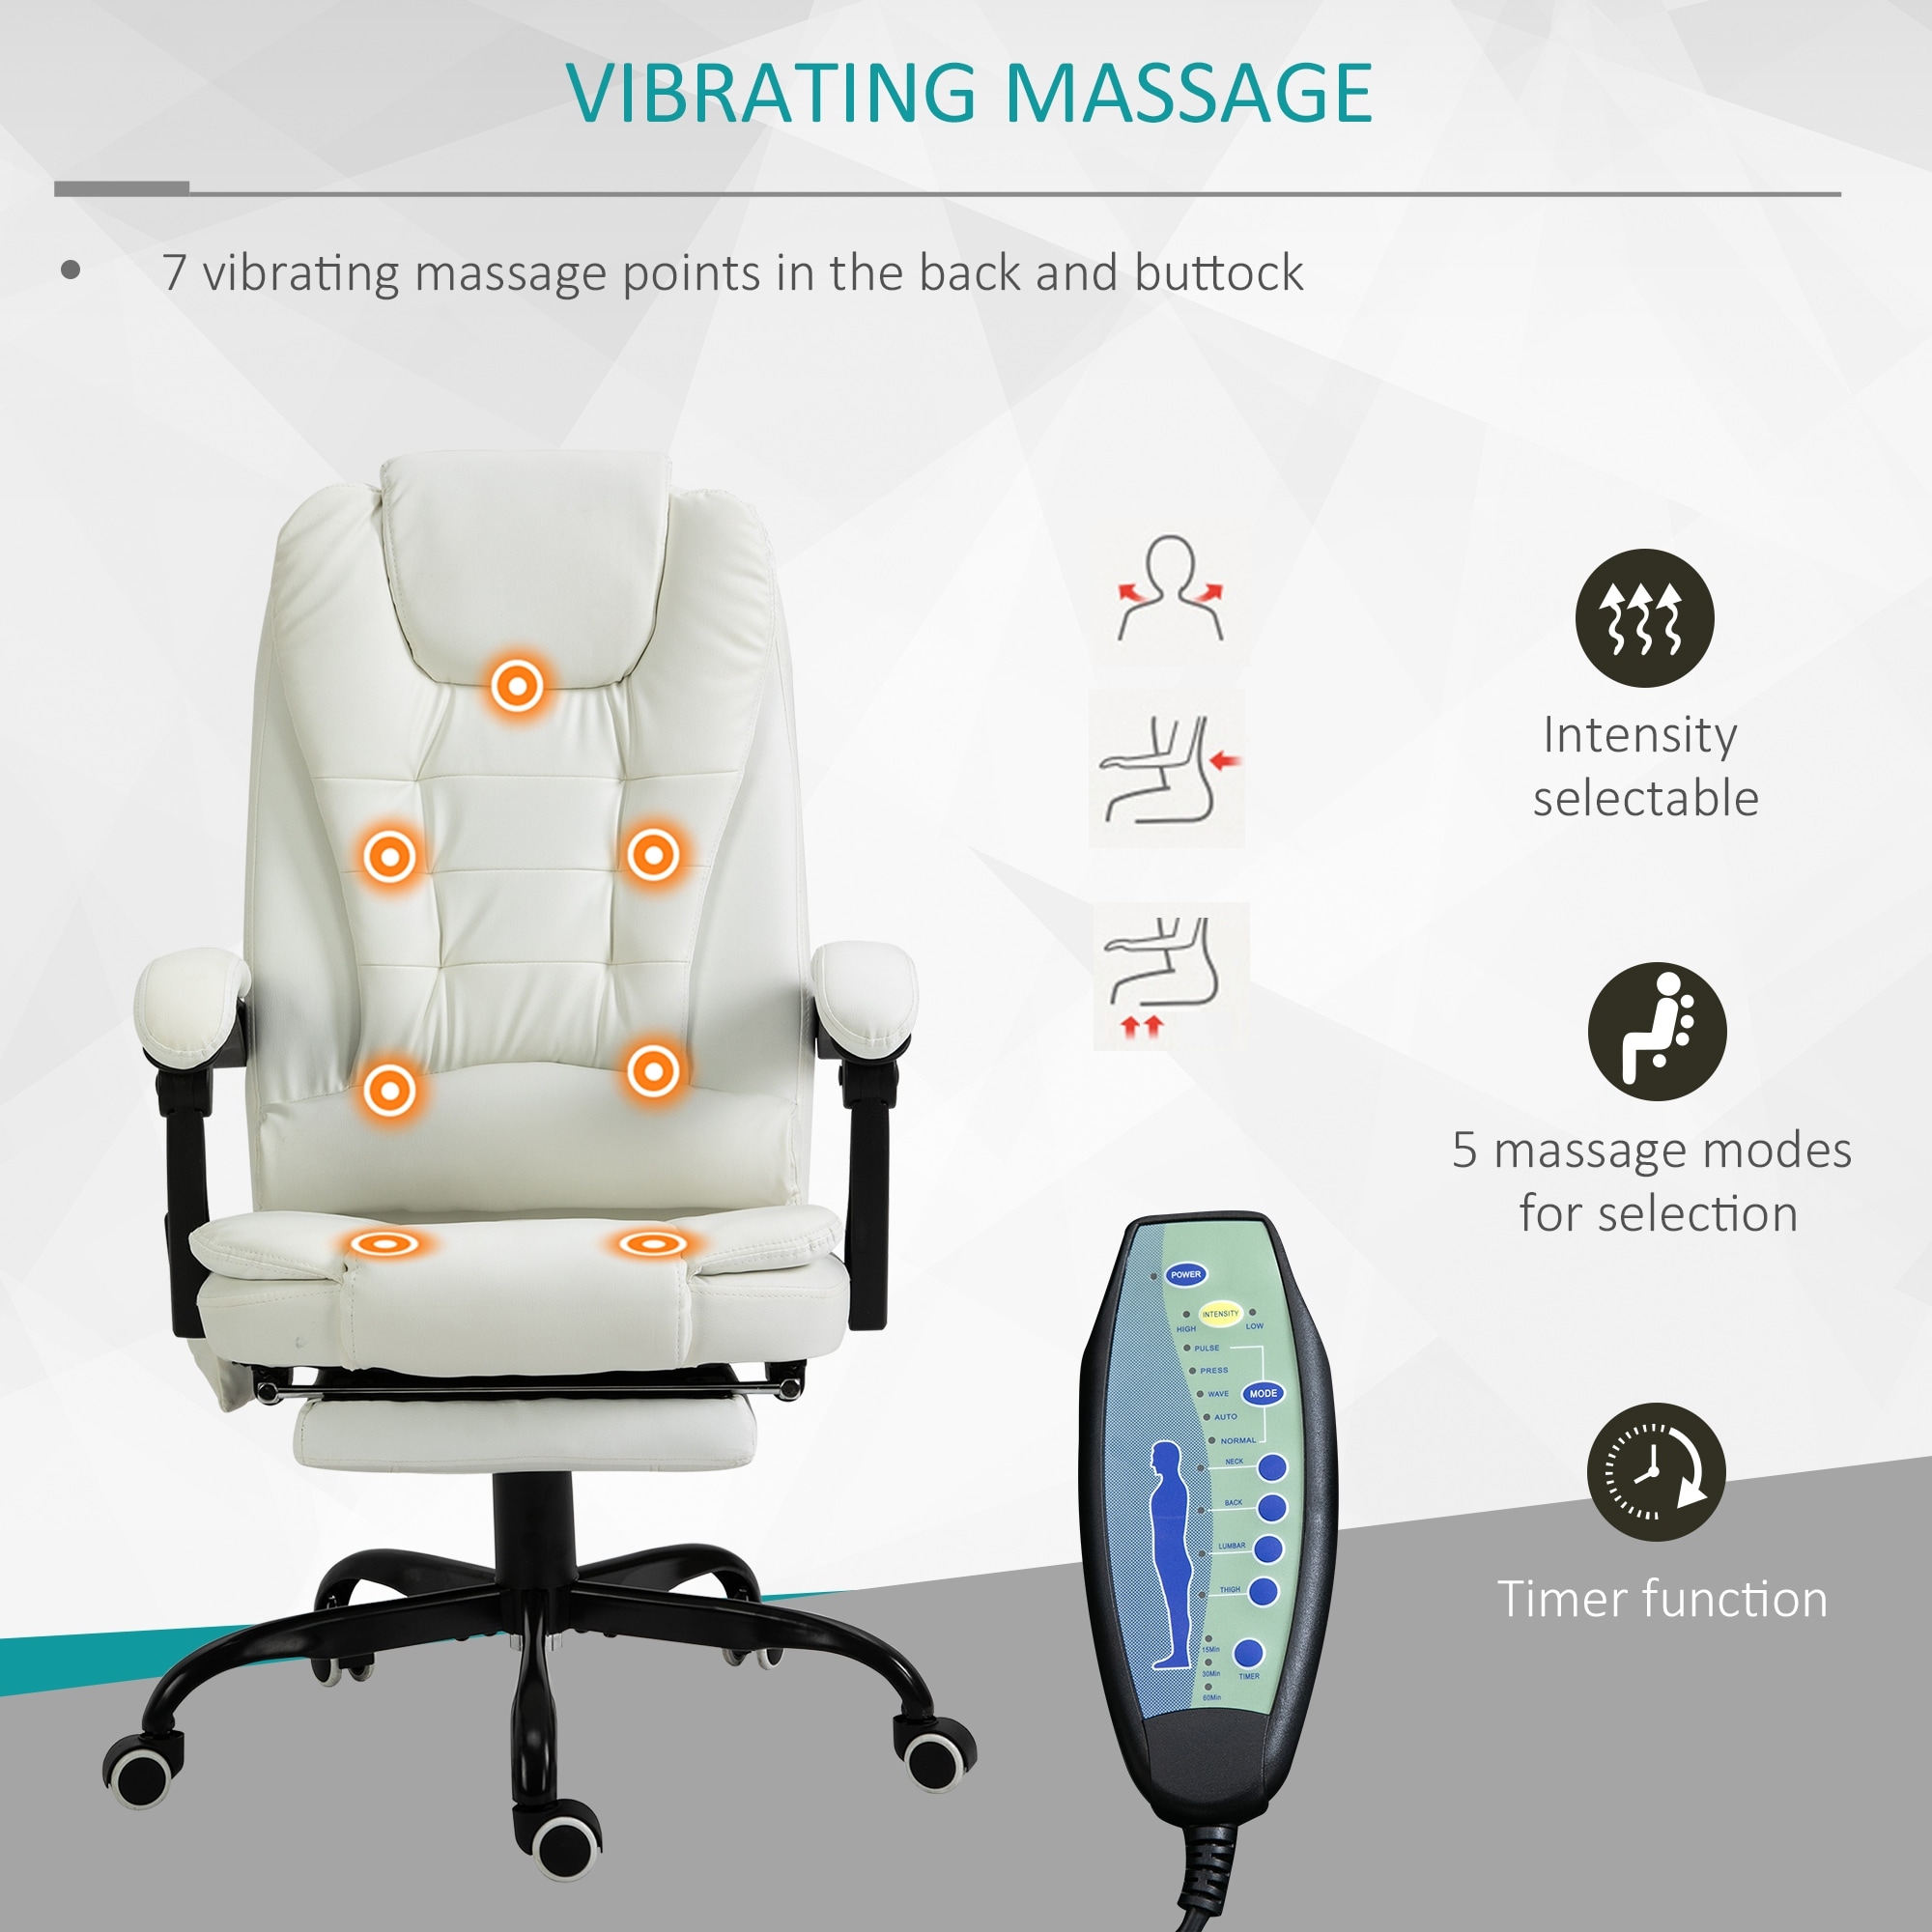 https://ak1.ostkcdn.com/images/products/is/images/direct/469d5f7207aa661a10fd2873d9eae1973432c724/Vinsetto-7-Point-Vibrating-Massage-Office-Chair-High-Back-Executive-Recliner-with-Lumbar-Support%2C-Footrest%2C-Reclining-Back.jpg